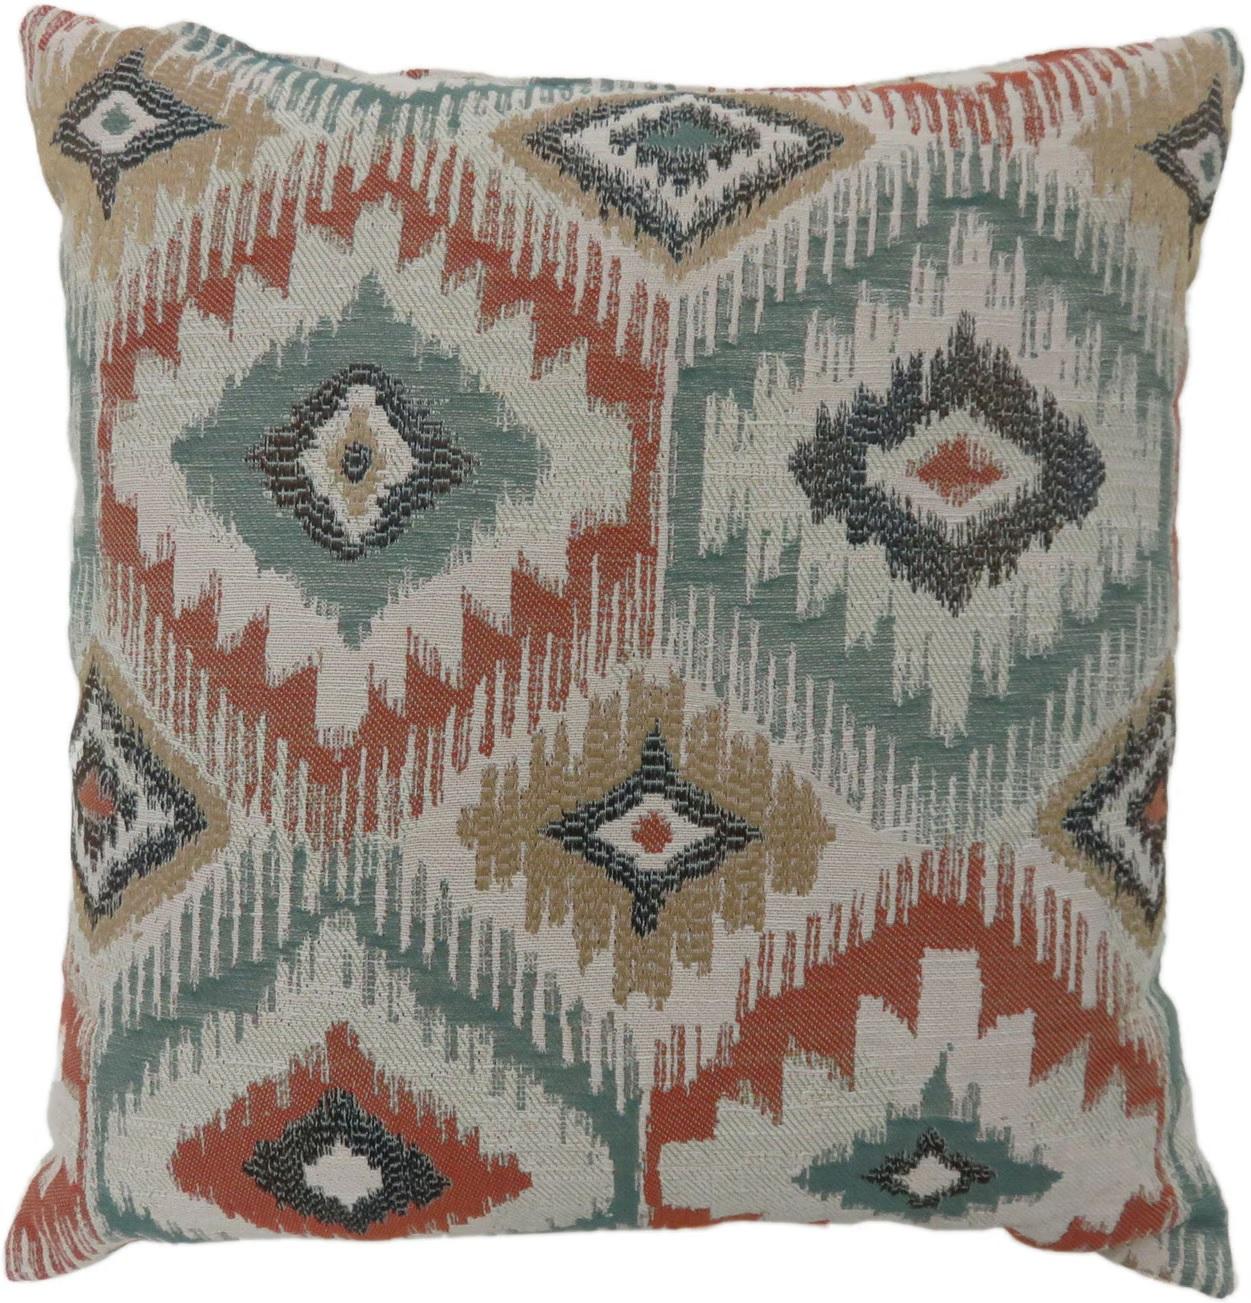 Contemporary Throw Pillow PL6025S Sierra PL6025S in Multi 